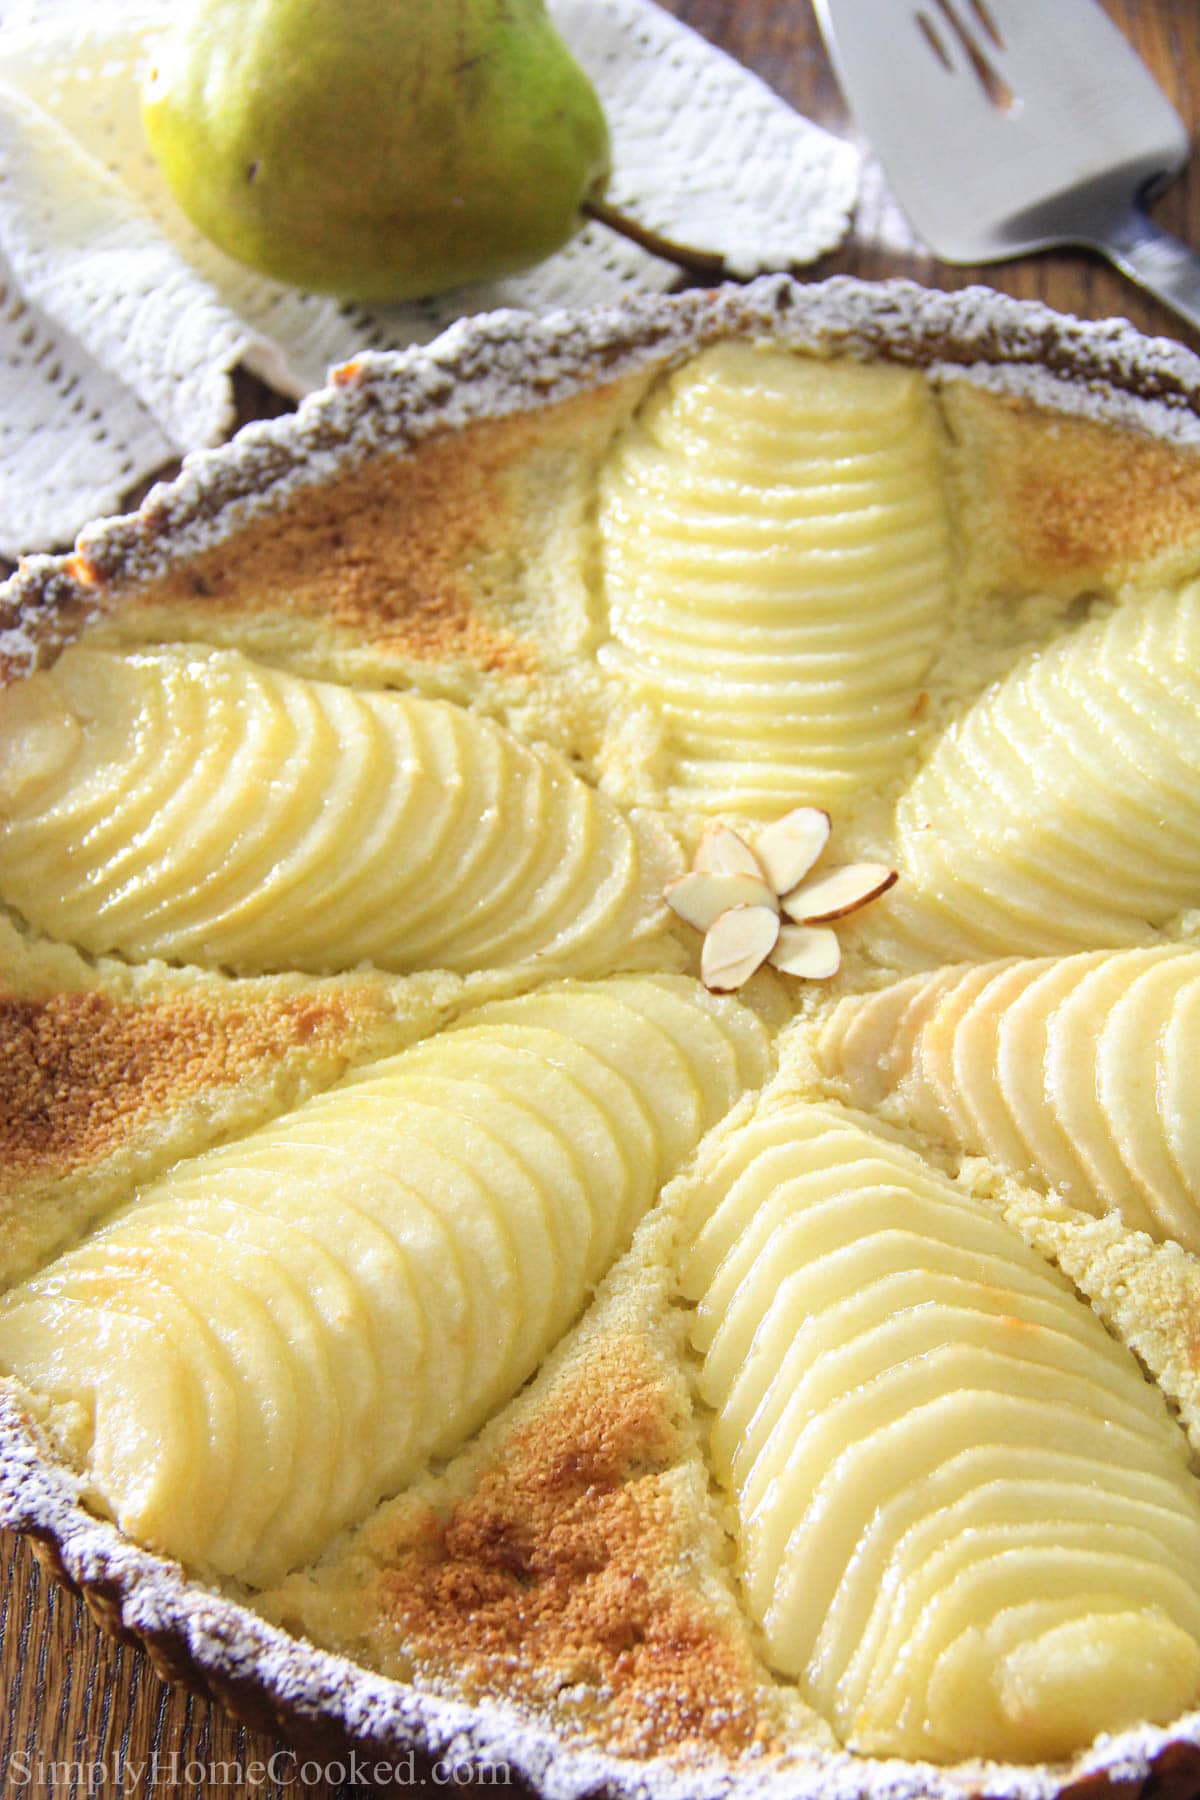 Vertical image of close up of Pear Tart